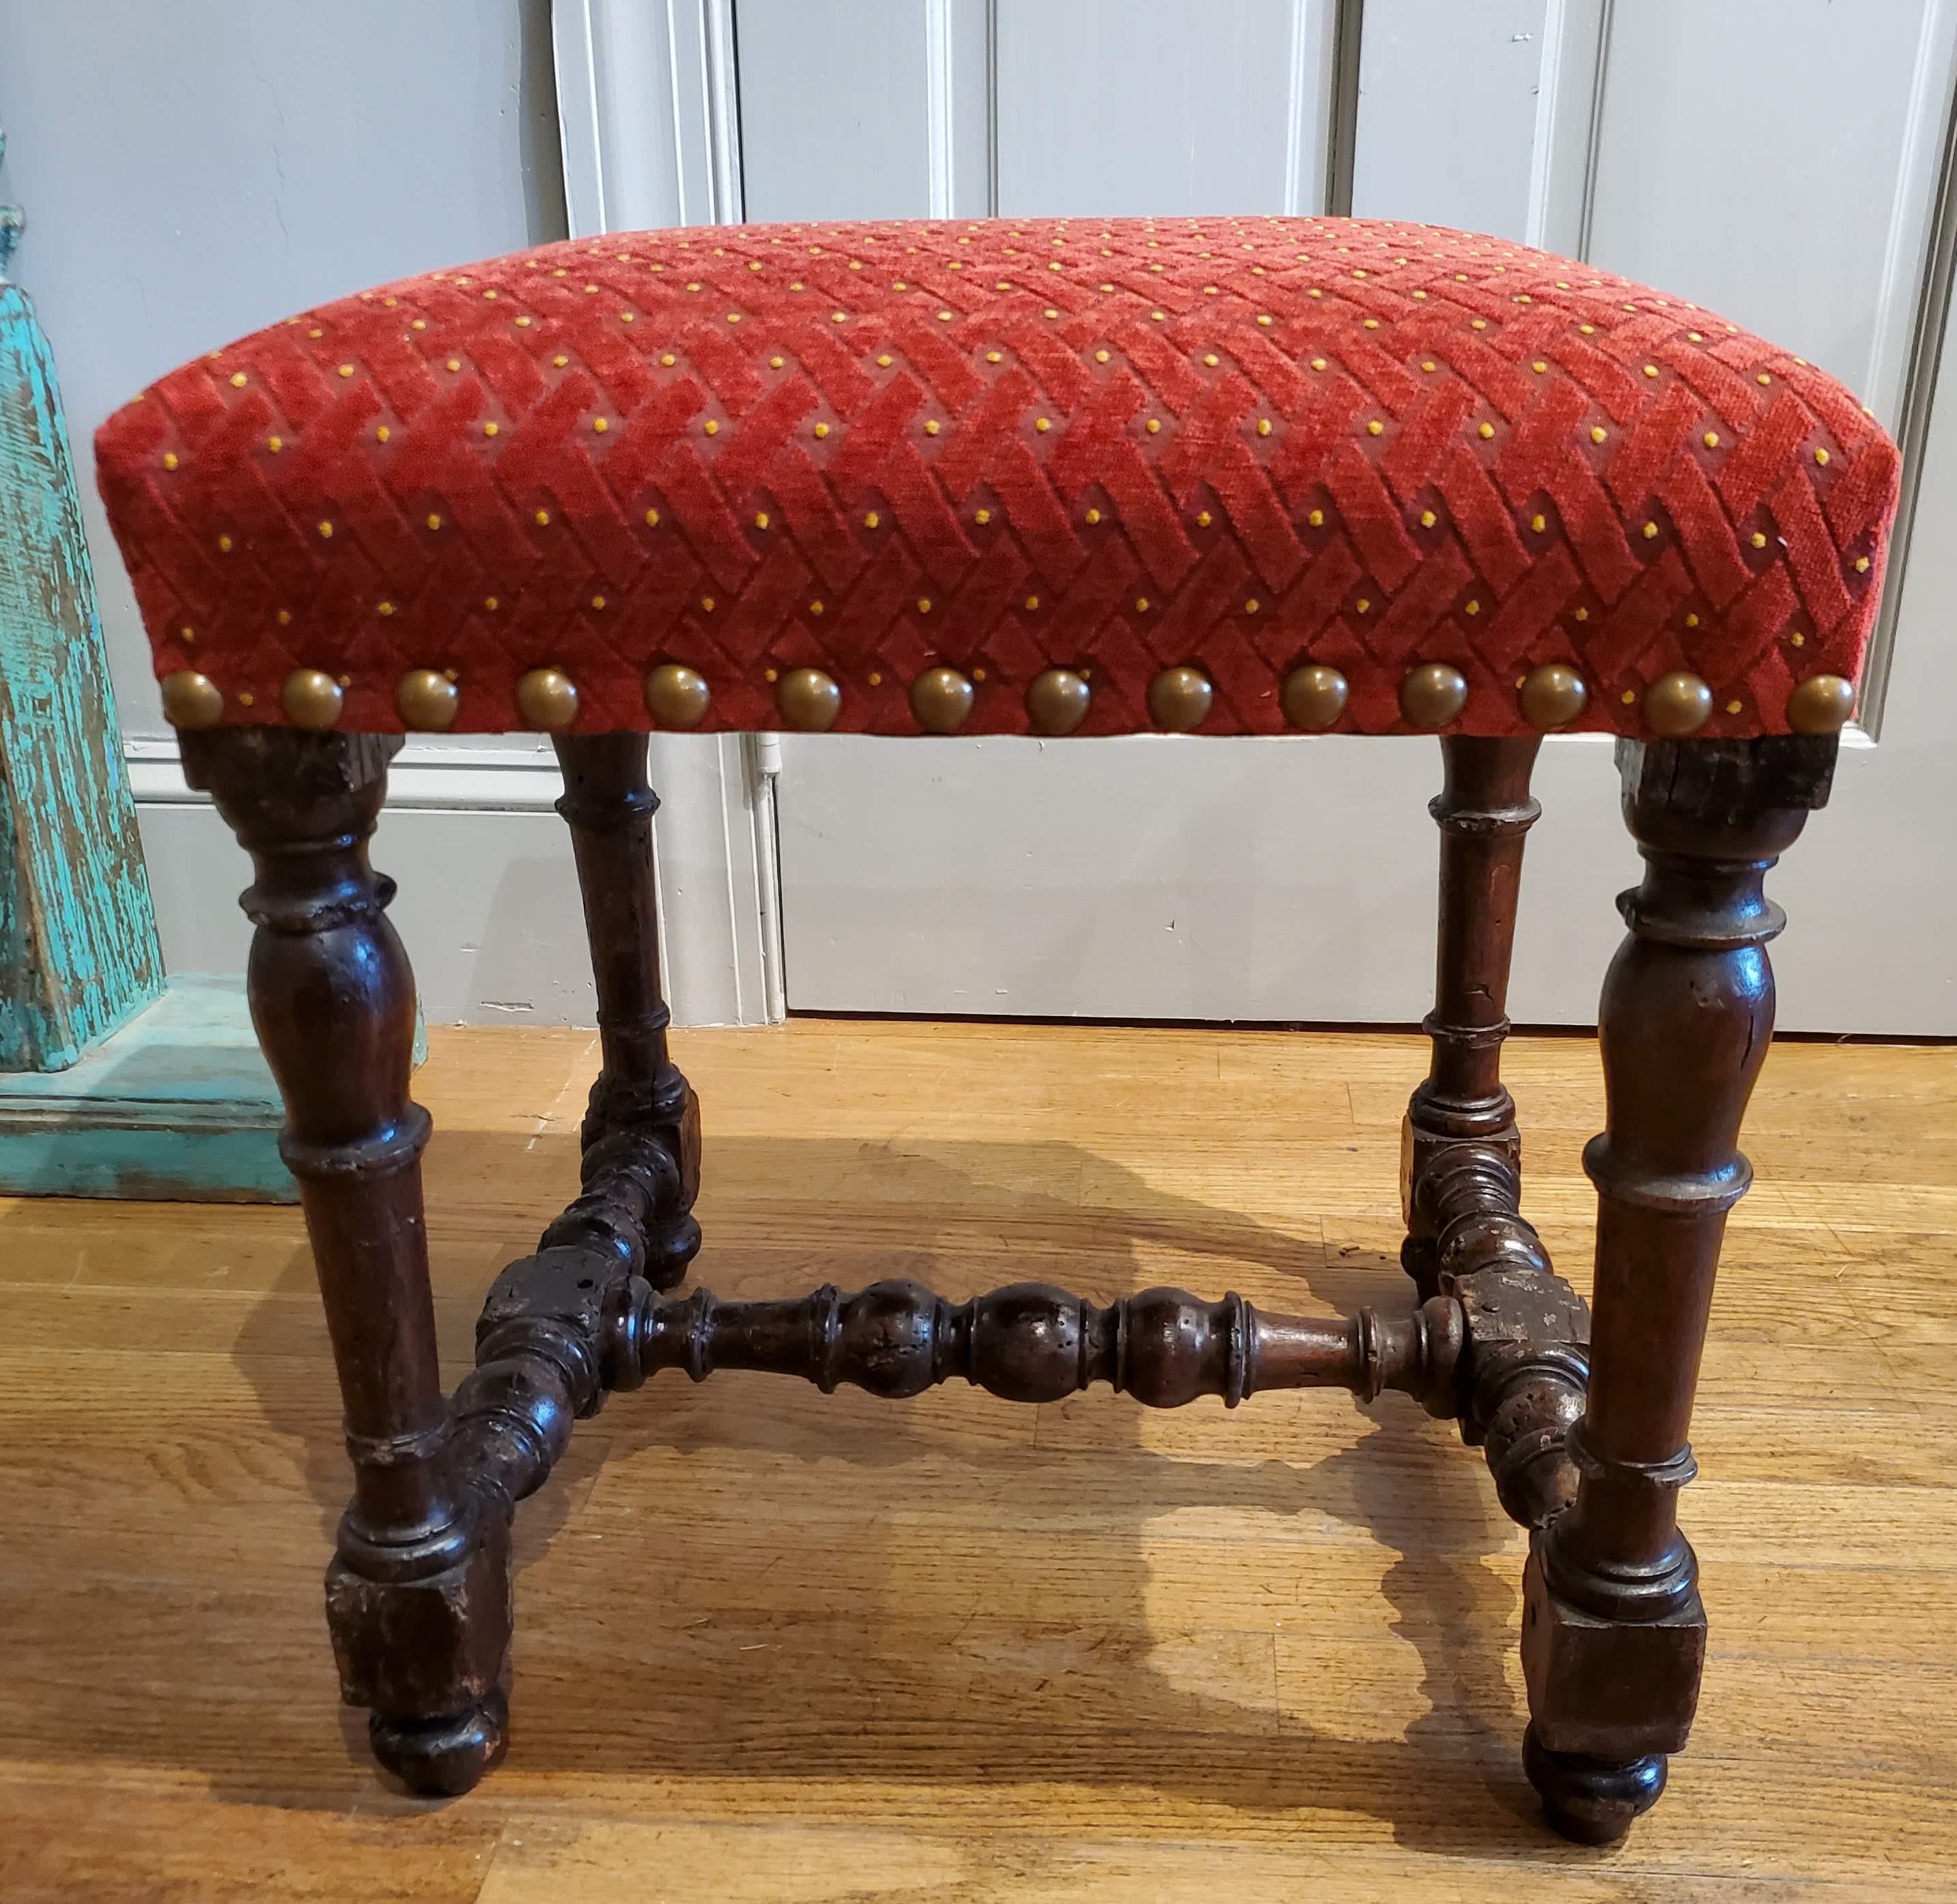 French Small 17th Century Stool Upholstered in Red Chenille Fabric and Brass Nailheads